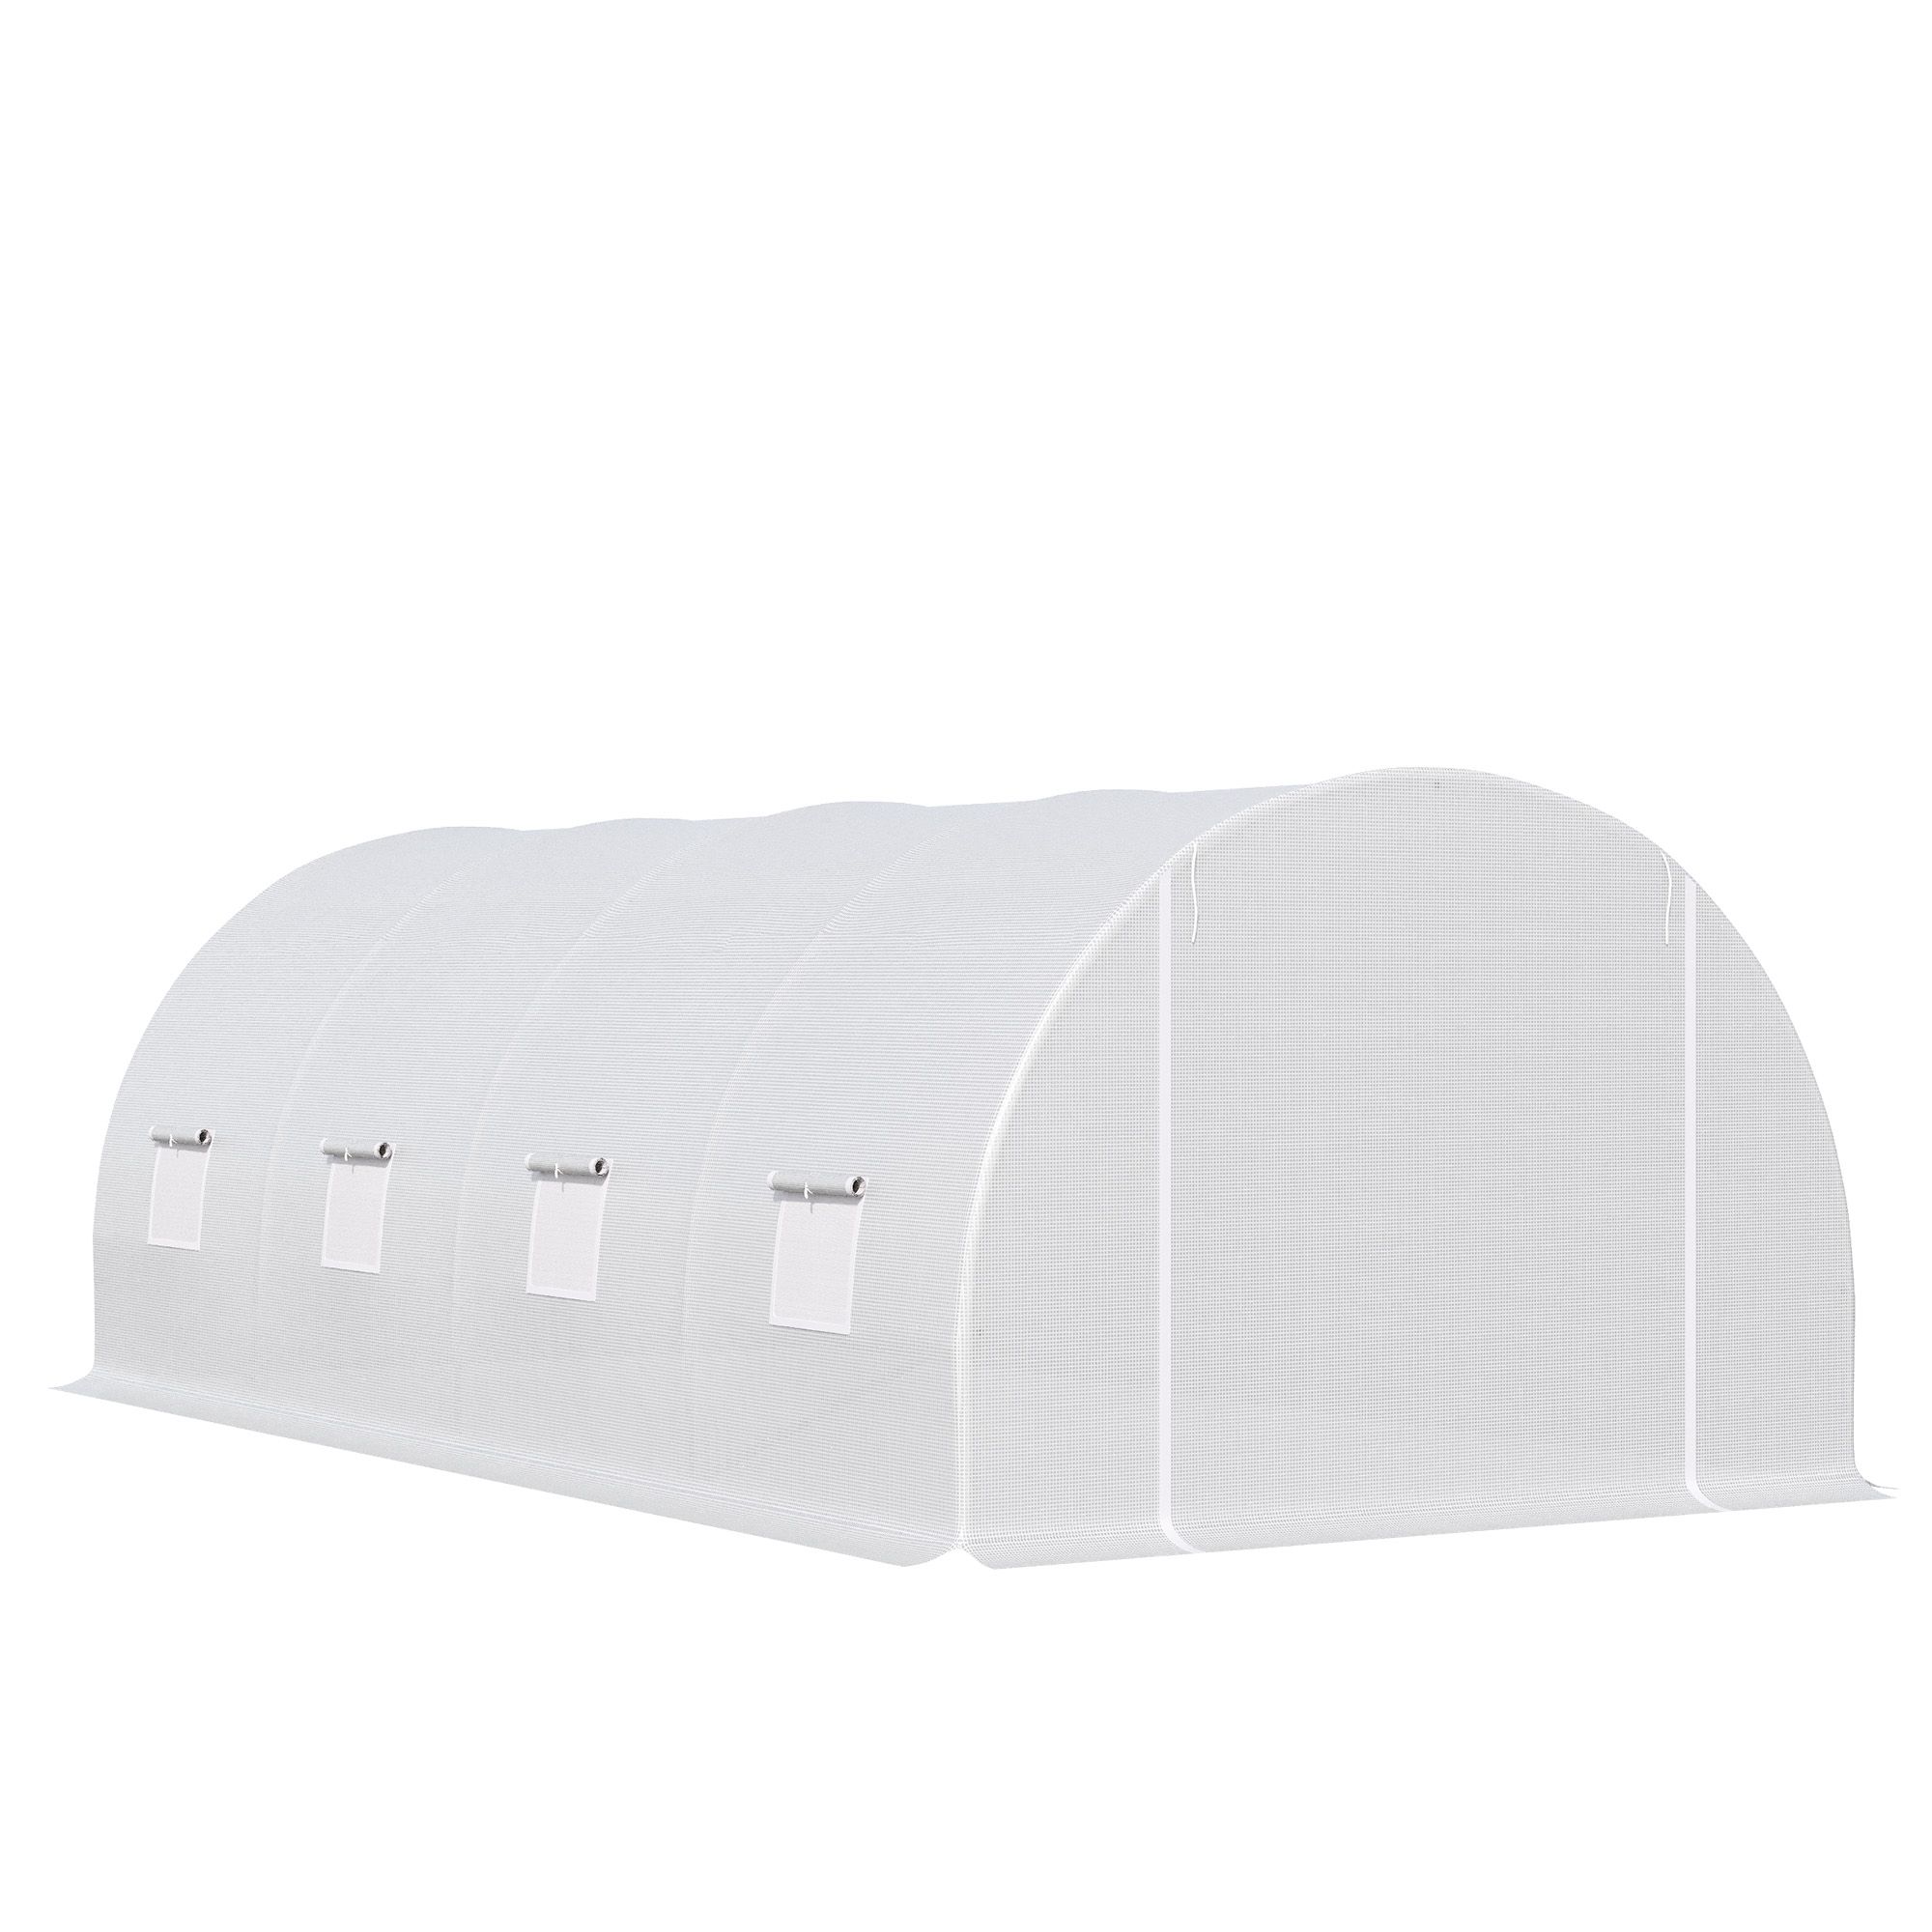 Outsunny 6 X 3 X 2 M Large Walk-in Greenhouse Garden Polytunnel Greenhouse With Metal Frame, Zippered Door And Roll Up Windows, White